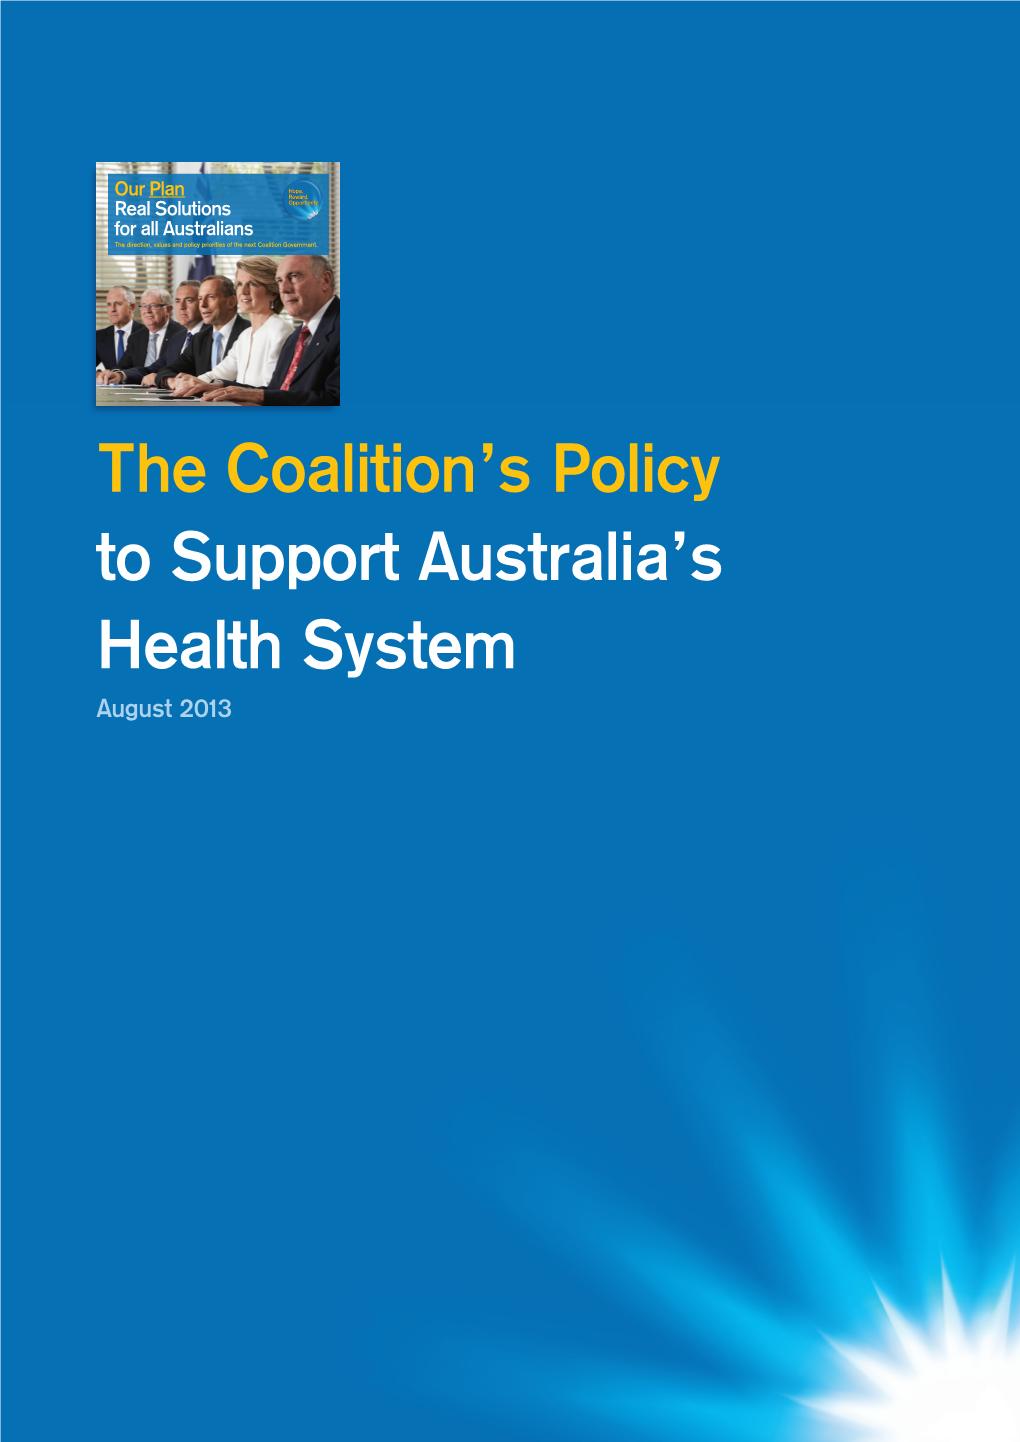 The Coalition's Policy to Support Australia's Health System